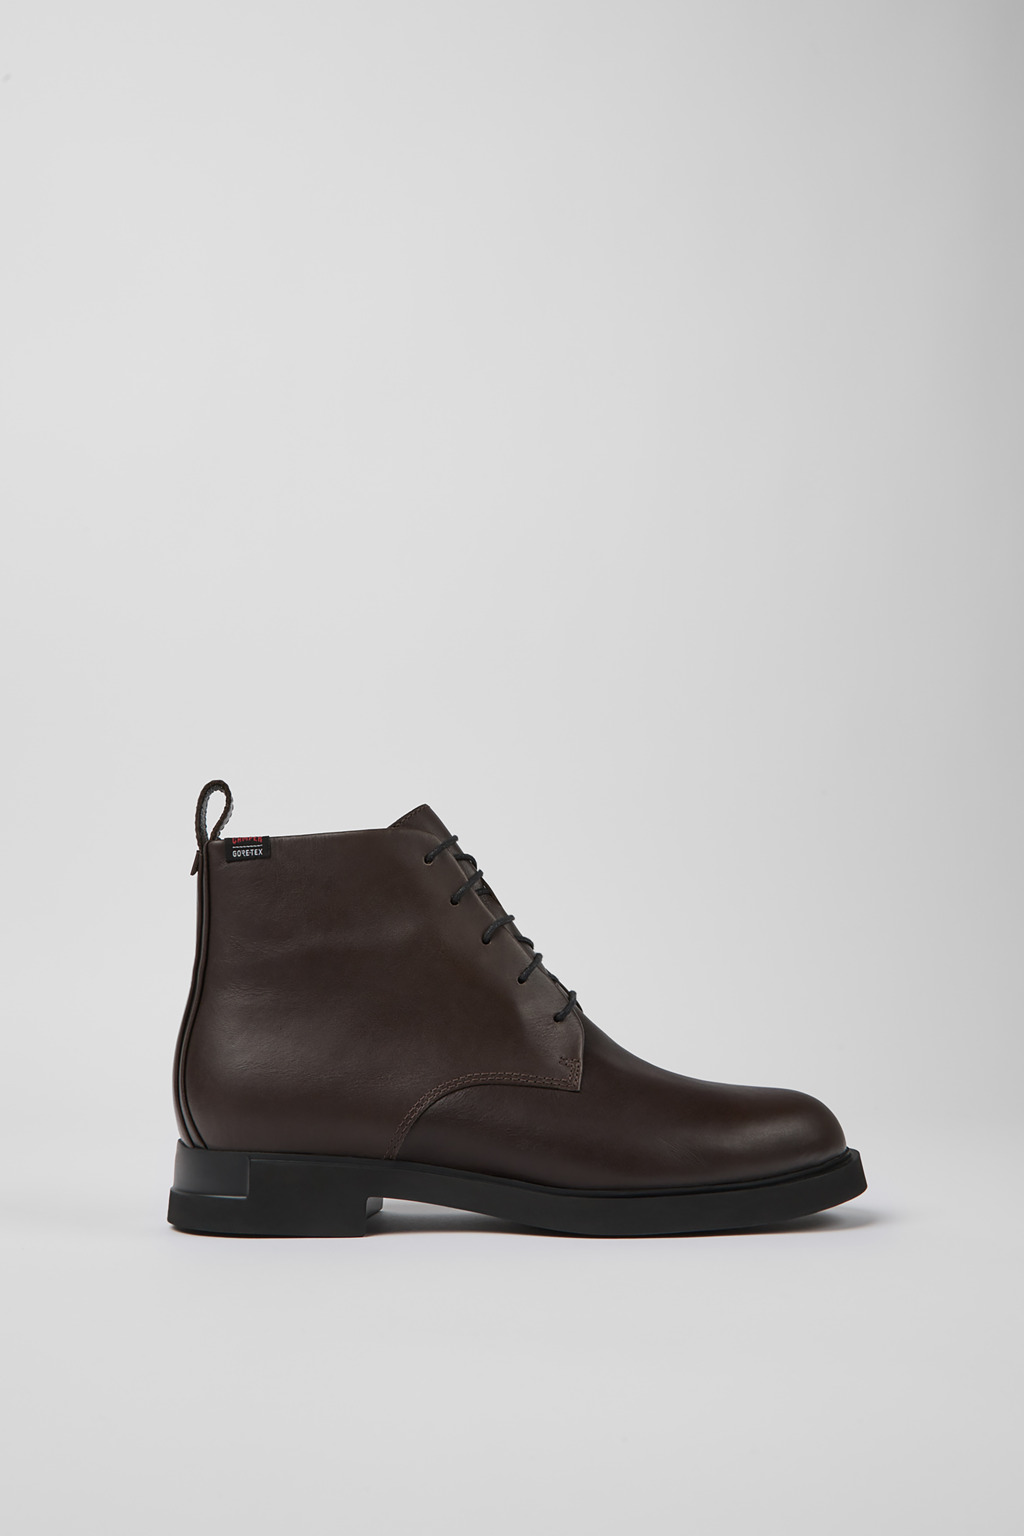 Iman Brown Ankle Boots for Women - Camper Shoes